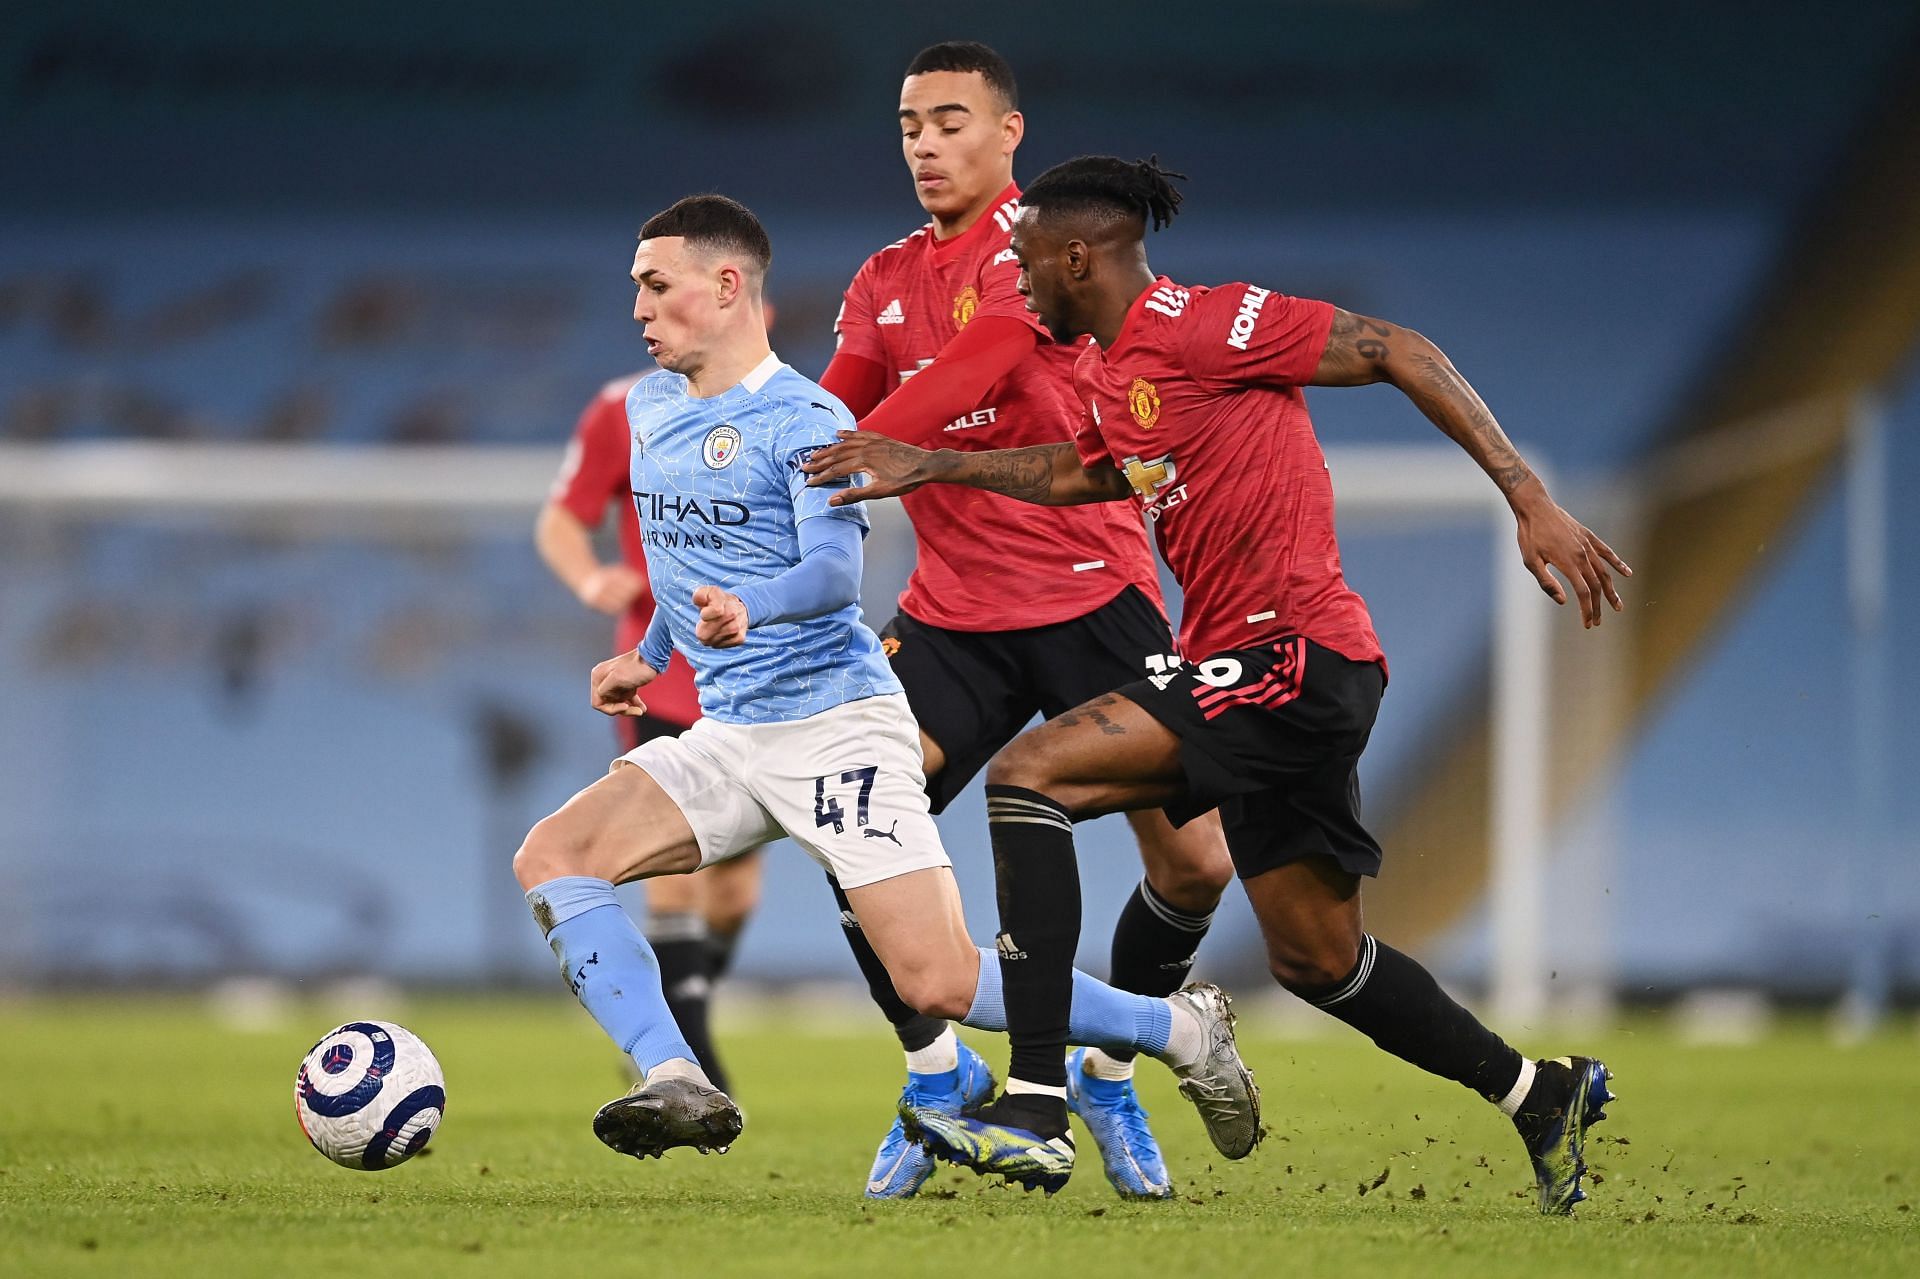 Foden and Greenwood are two of the brightest U-21 talents in the Premier League